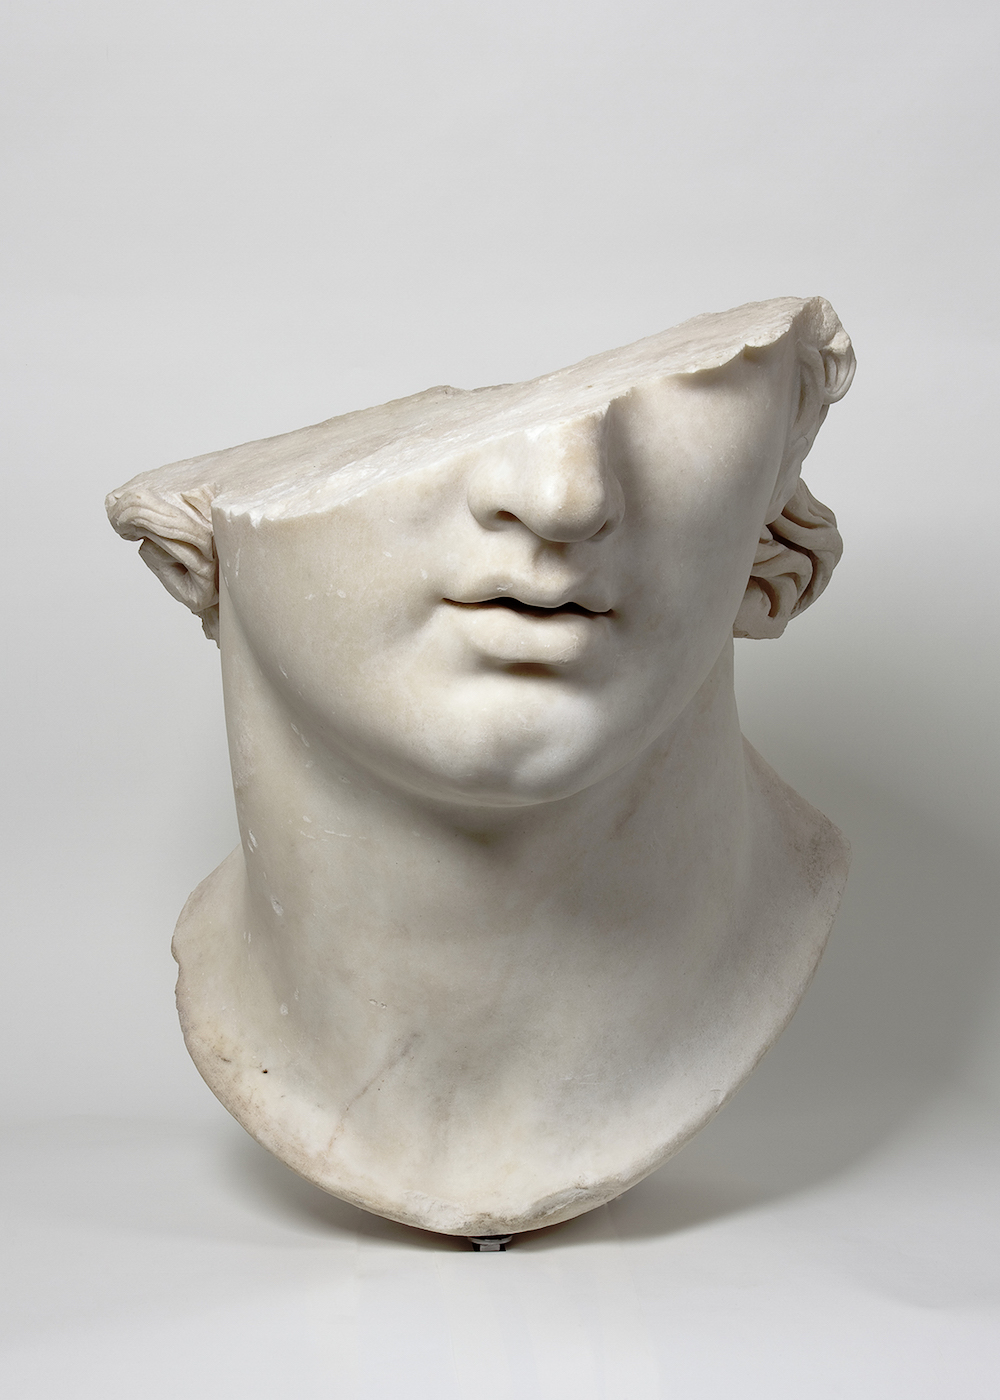 Fragmentary Colossal Head of a Youth (Hellenistic period, 2nd century BCE), marble (© SMB / Antikensammlung)